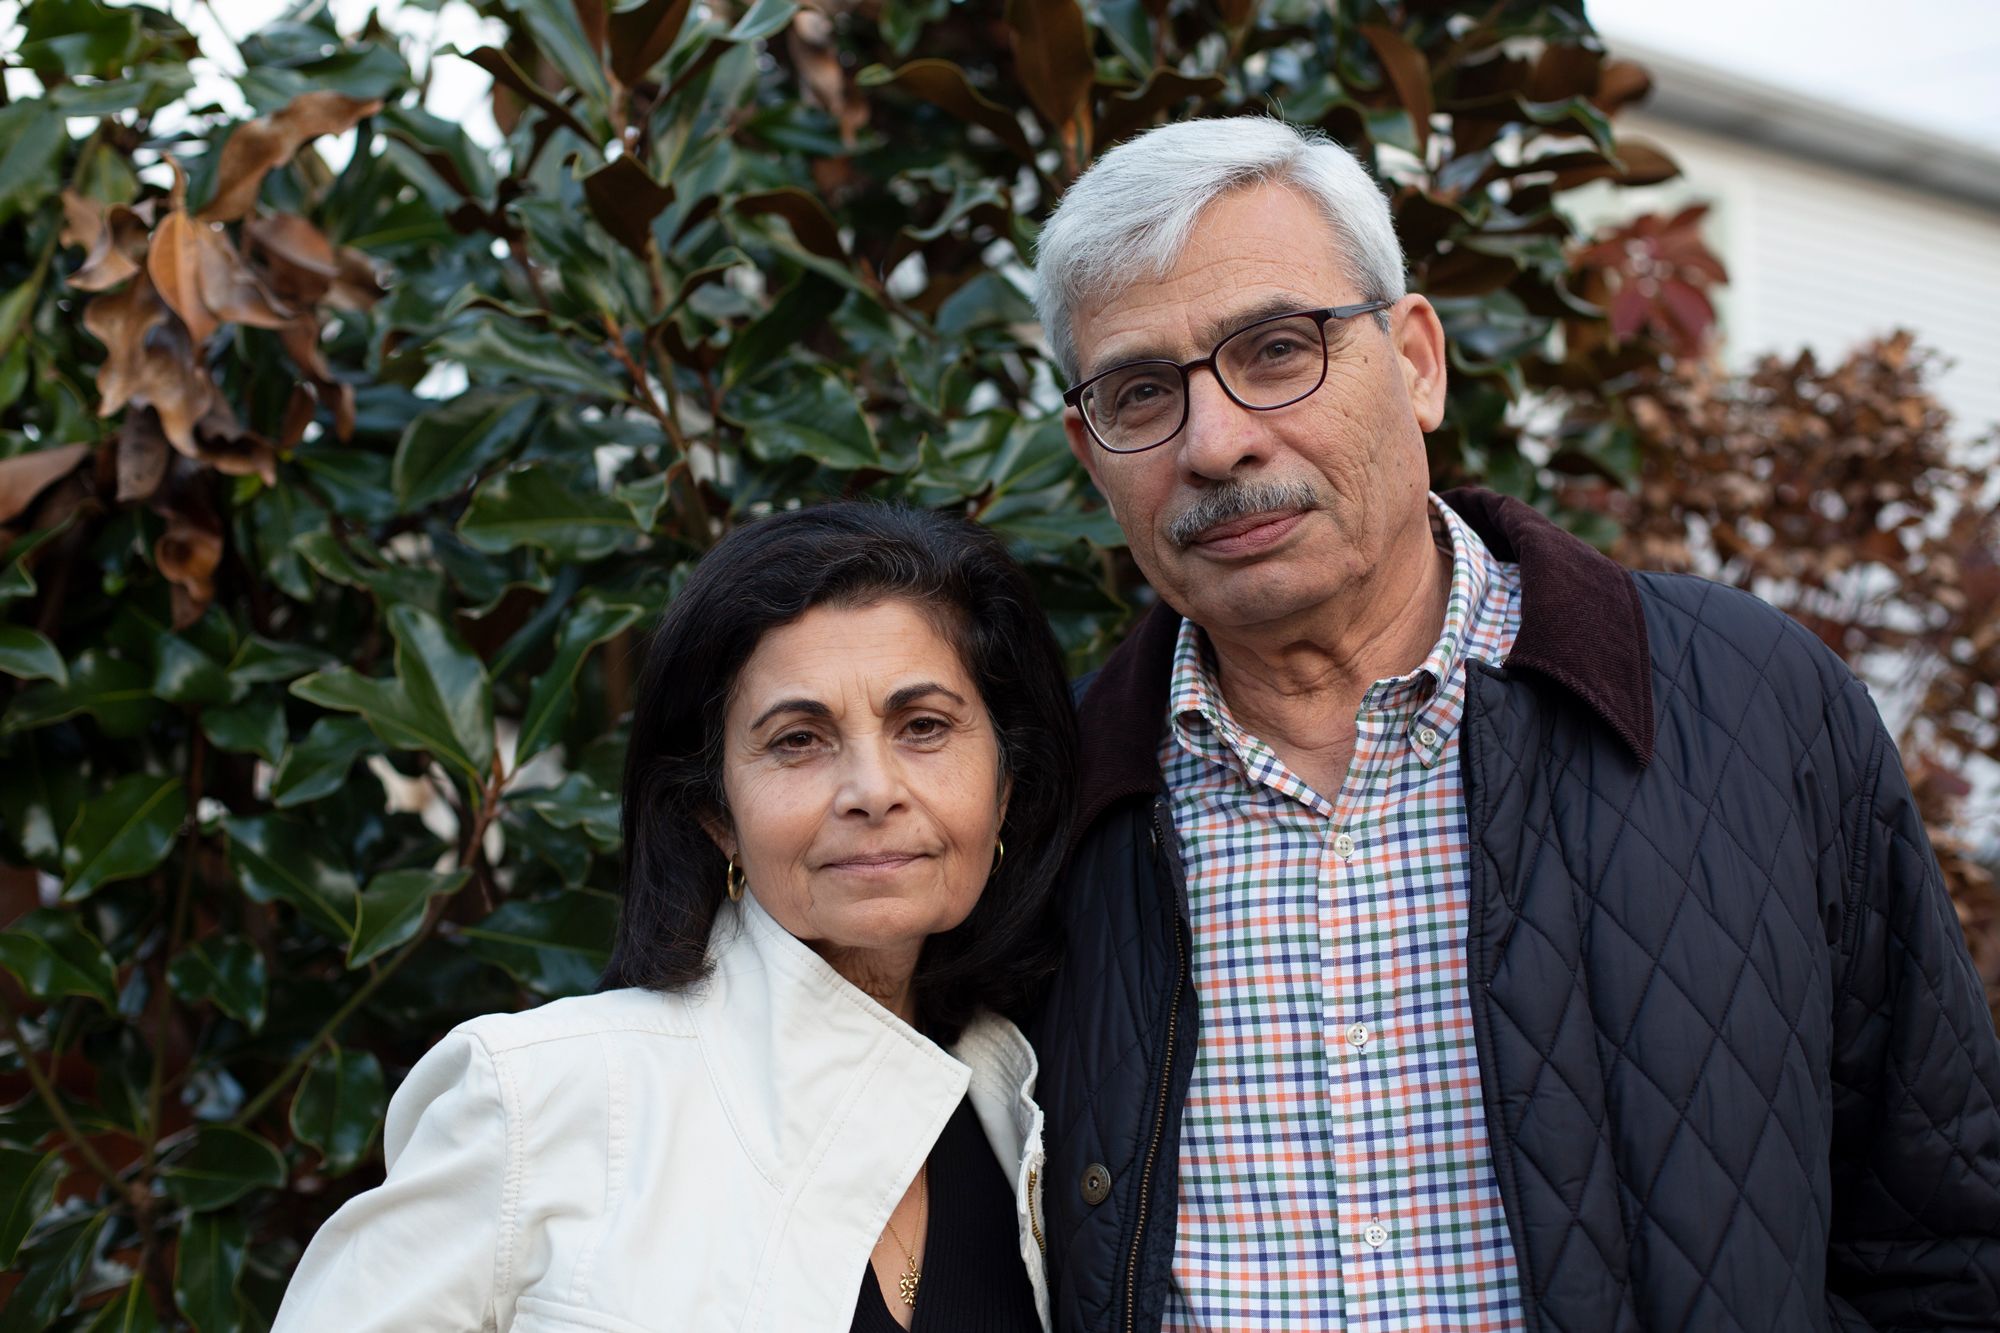 Rima Qasim and Adnan Khalil pose for a portrait in their backyard in Passaic, New Jersey, on November 15.